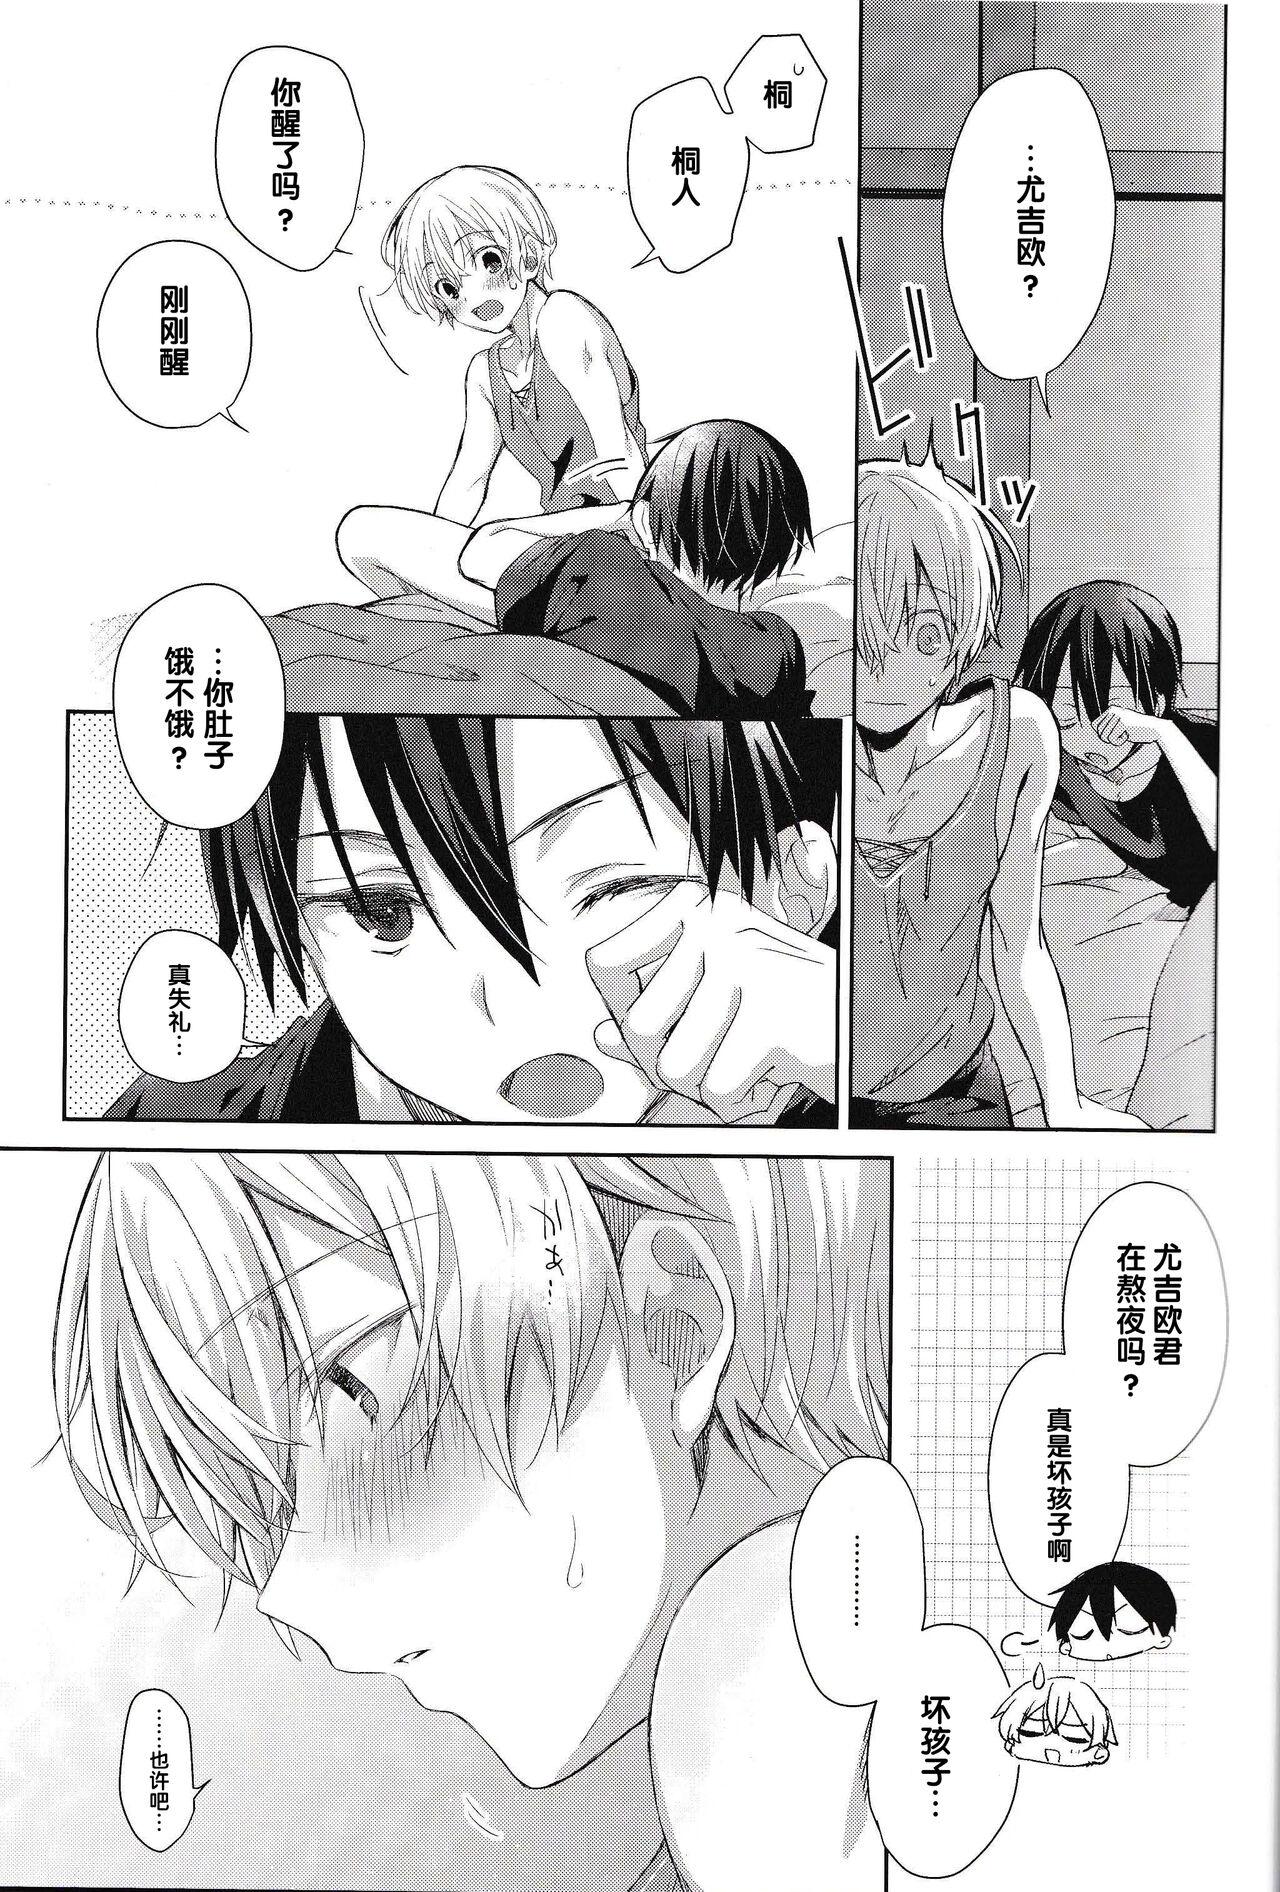 Strapon Oyasumi After Motion - Sword art online Fetiche - Page 4